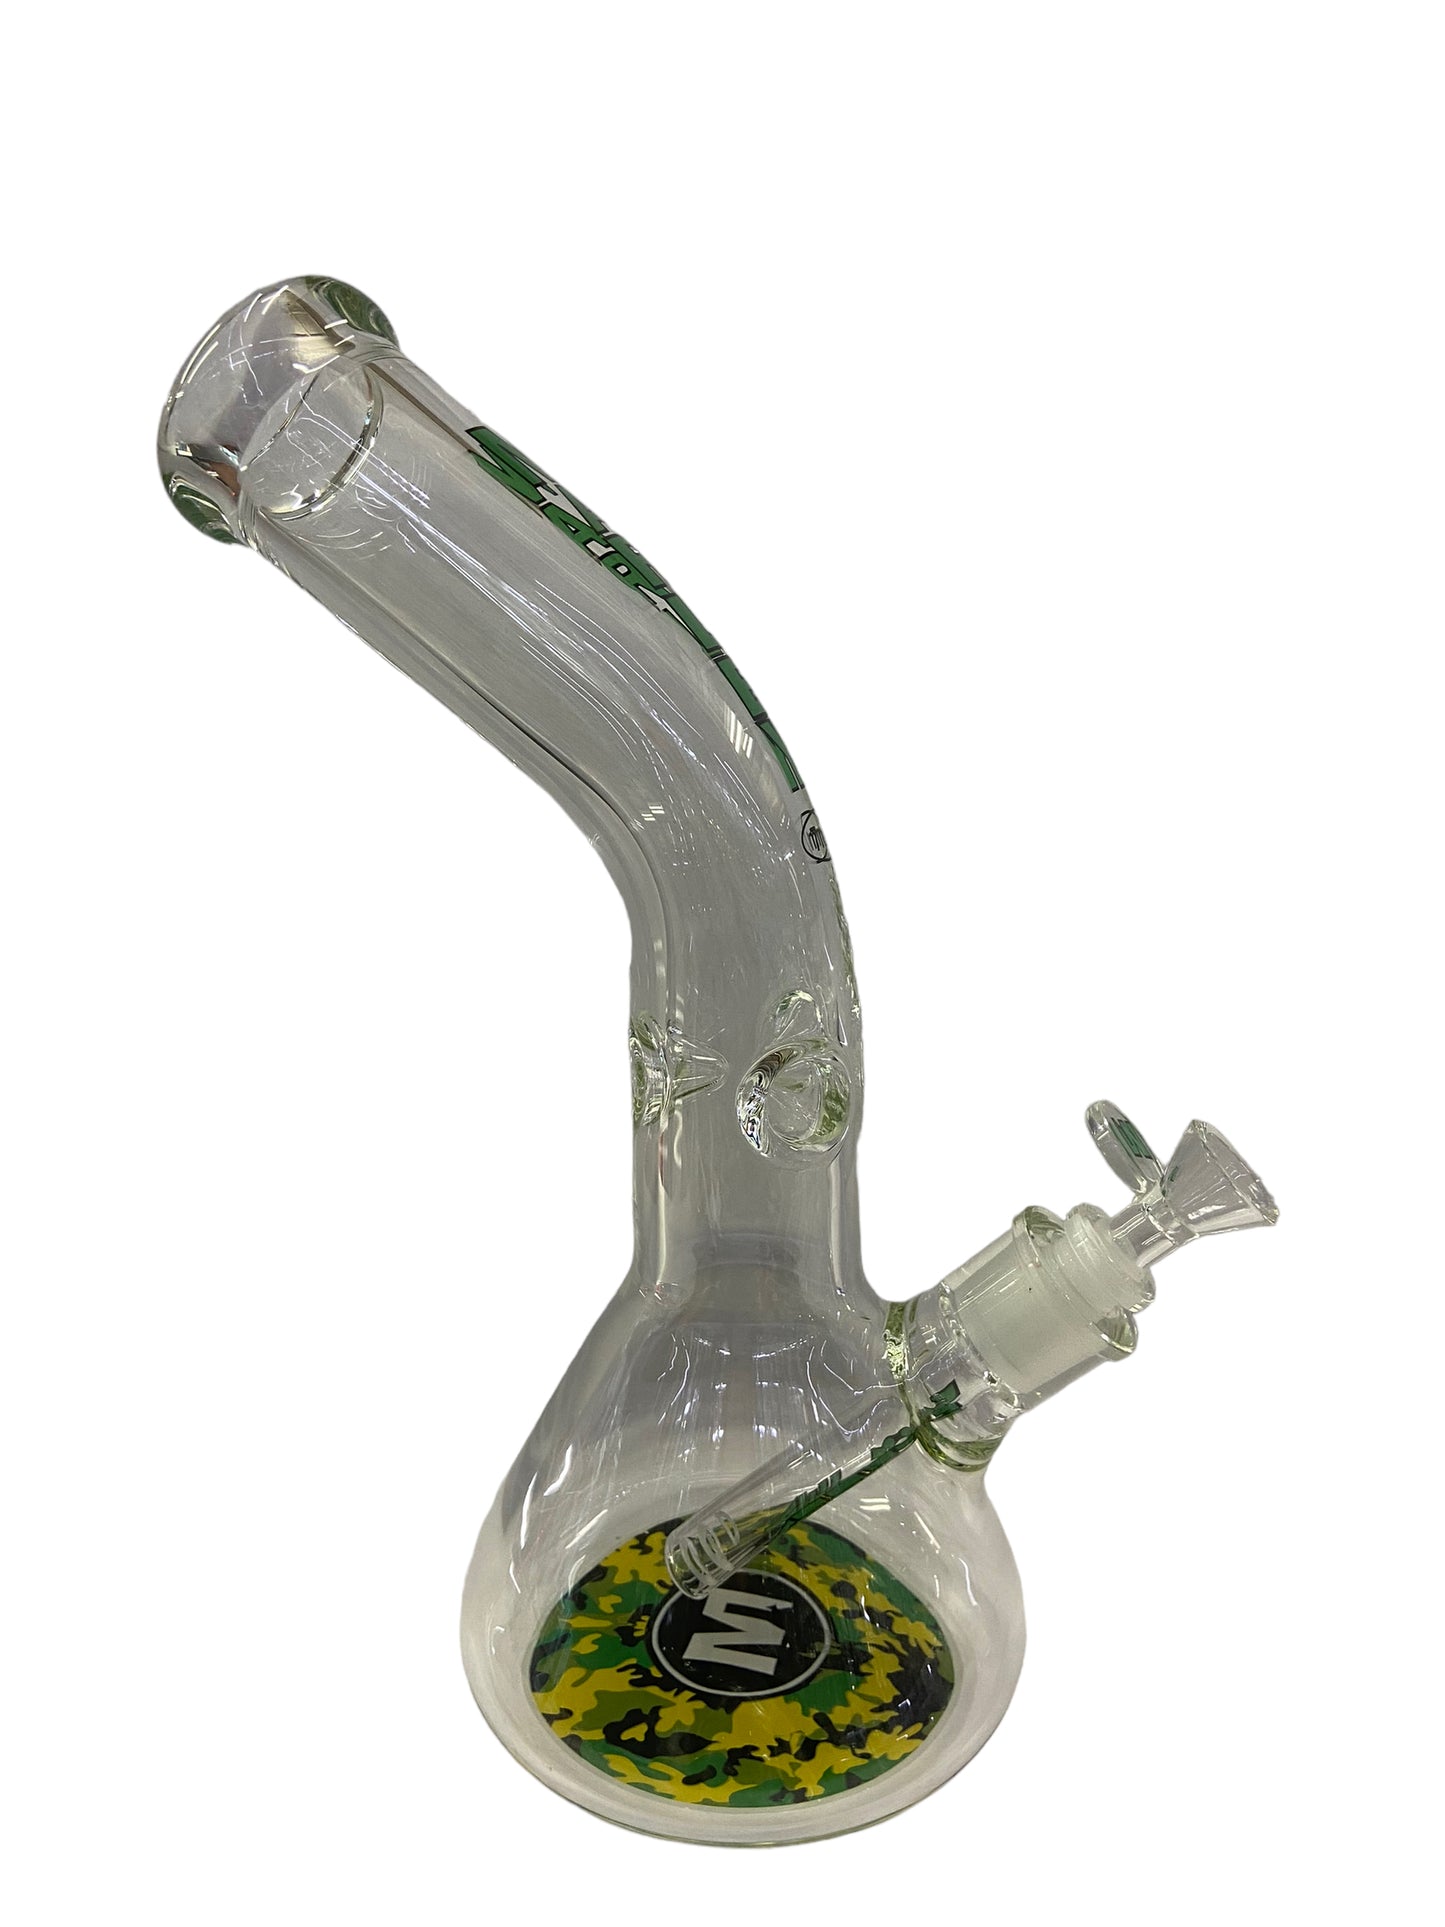 Green Marley 13" Curved Bong (7mm) - Glass Bong - The Wee Smoke Shop